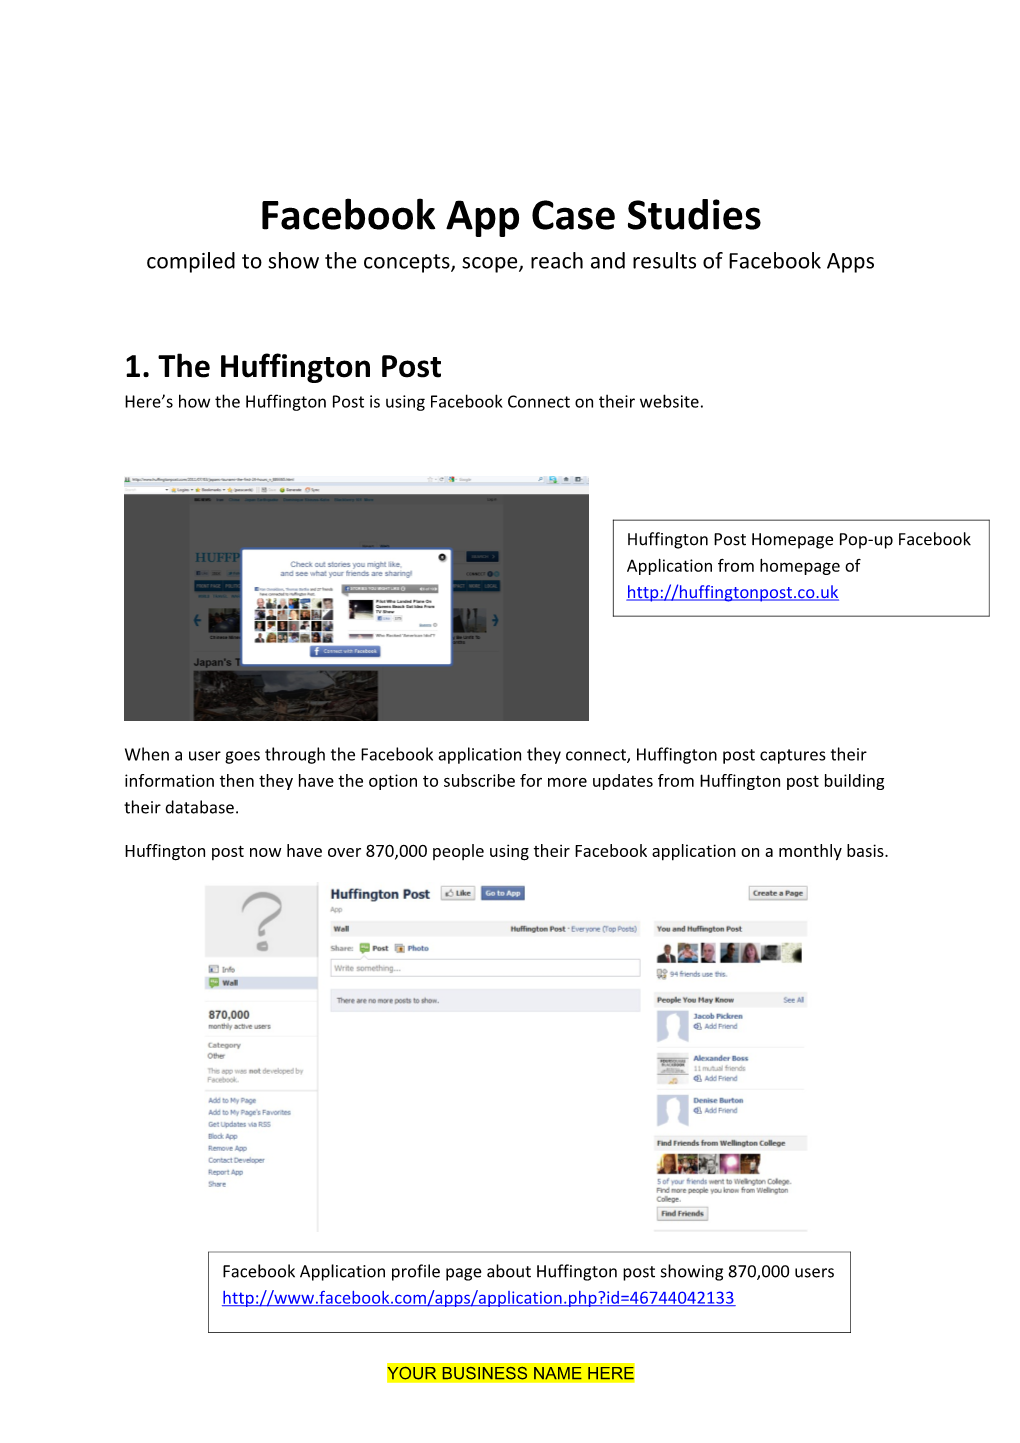 Facebook App Case Studies Compiled to Show the Concepts, Scope, Reach and Results of Facebook